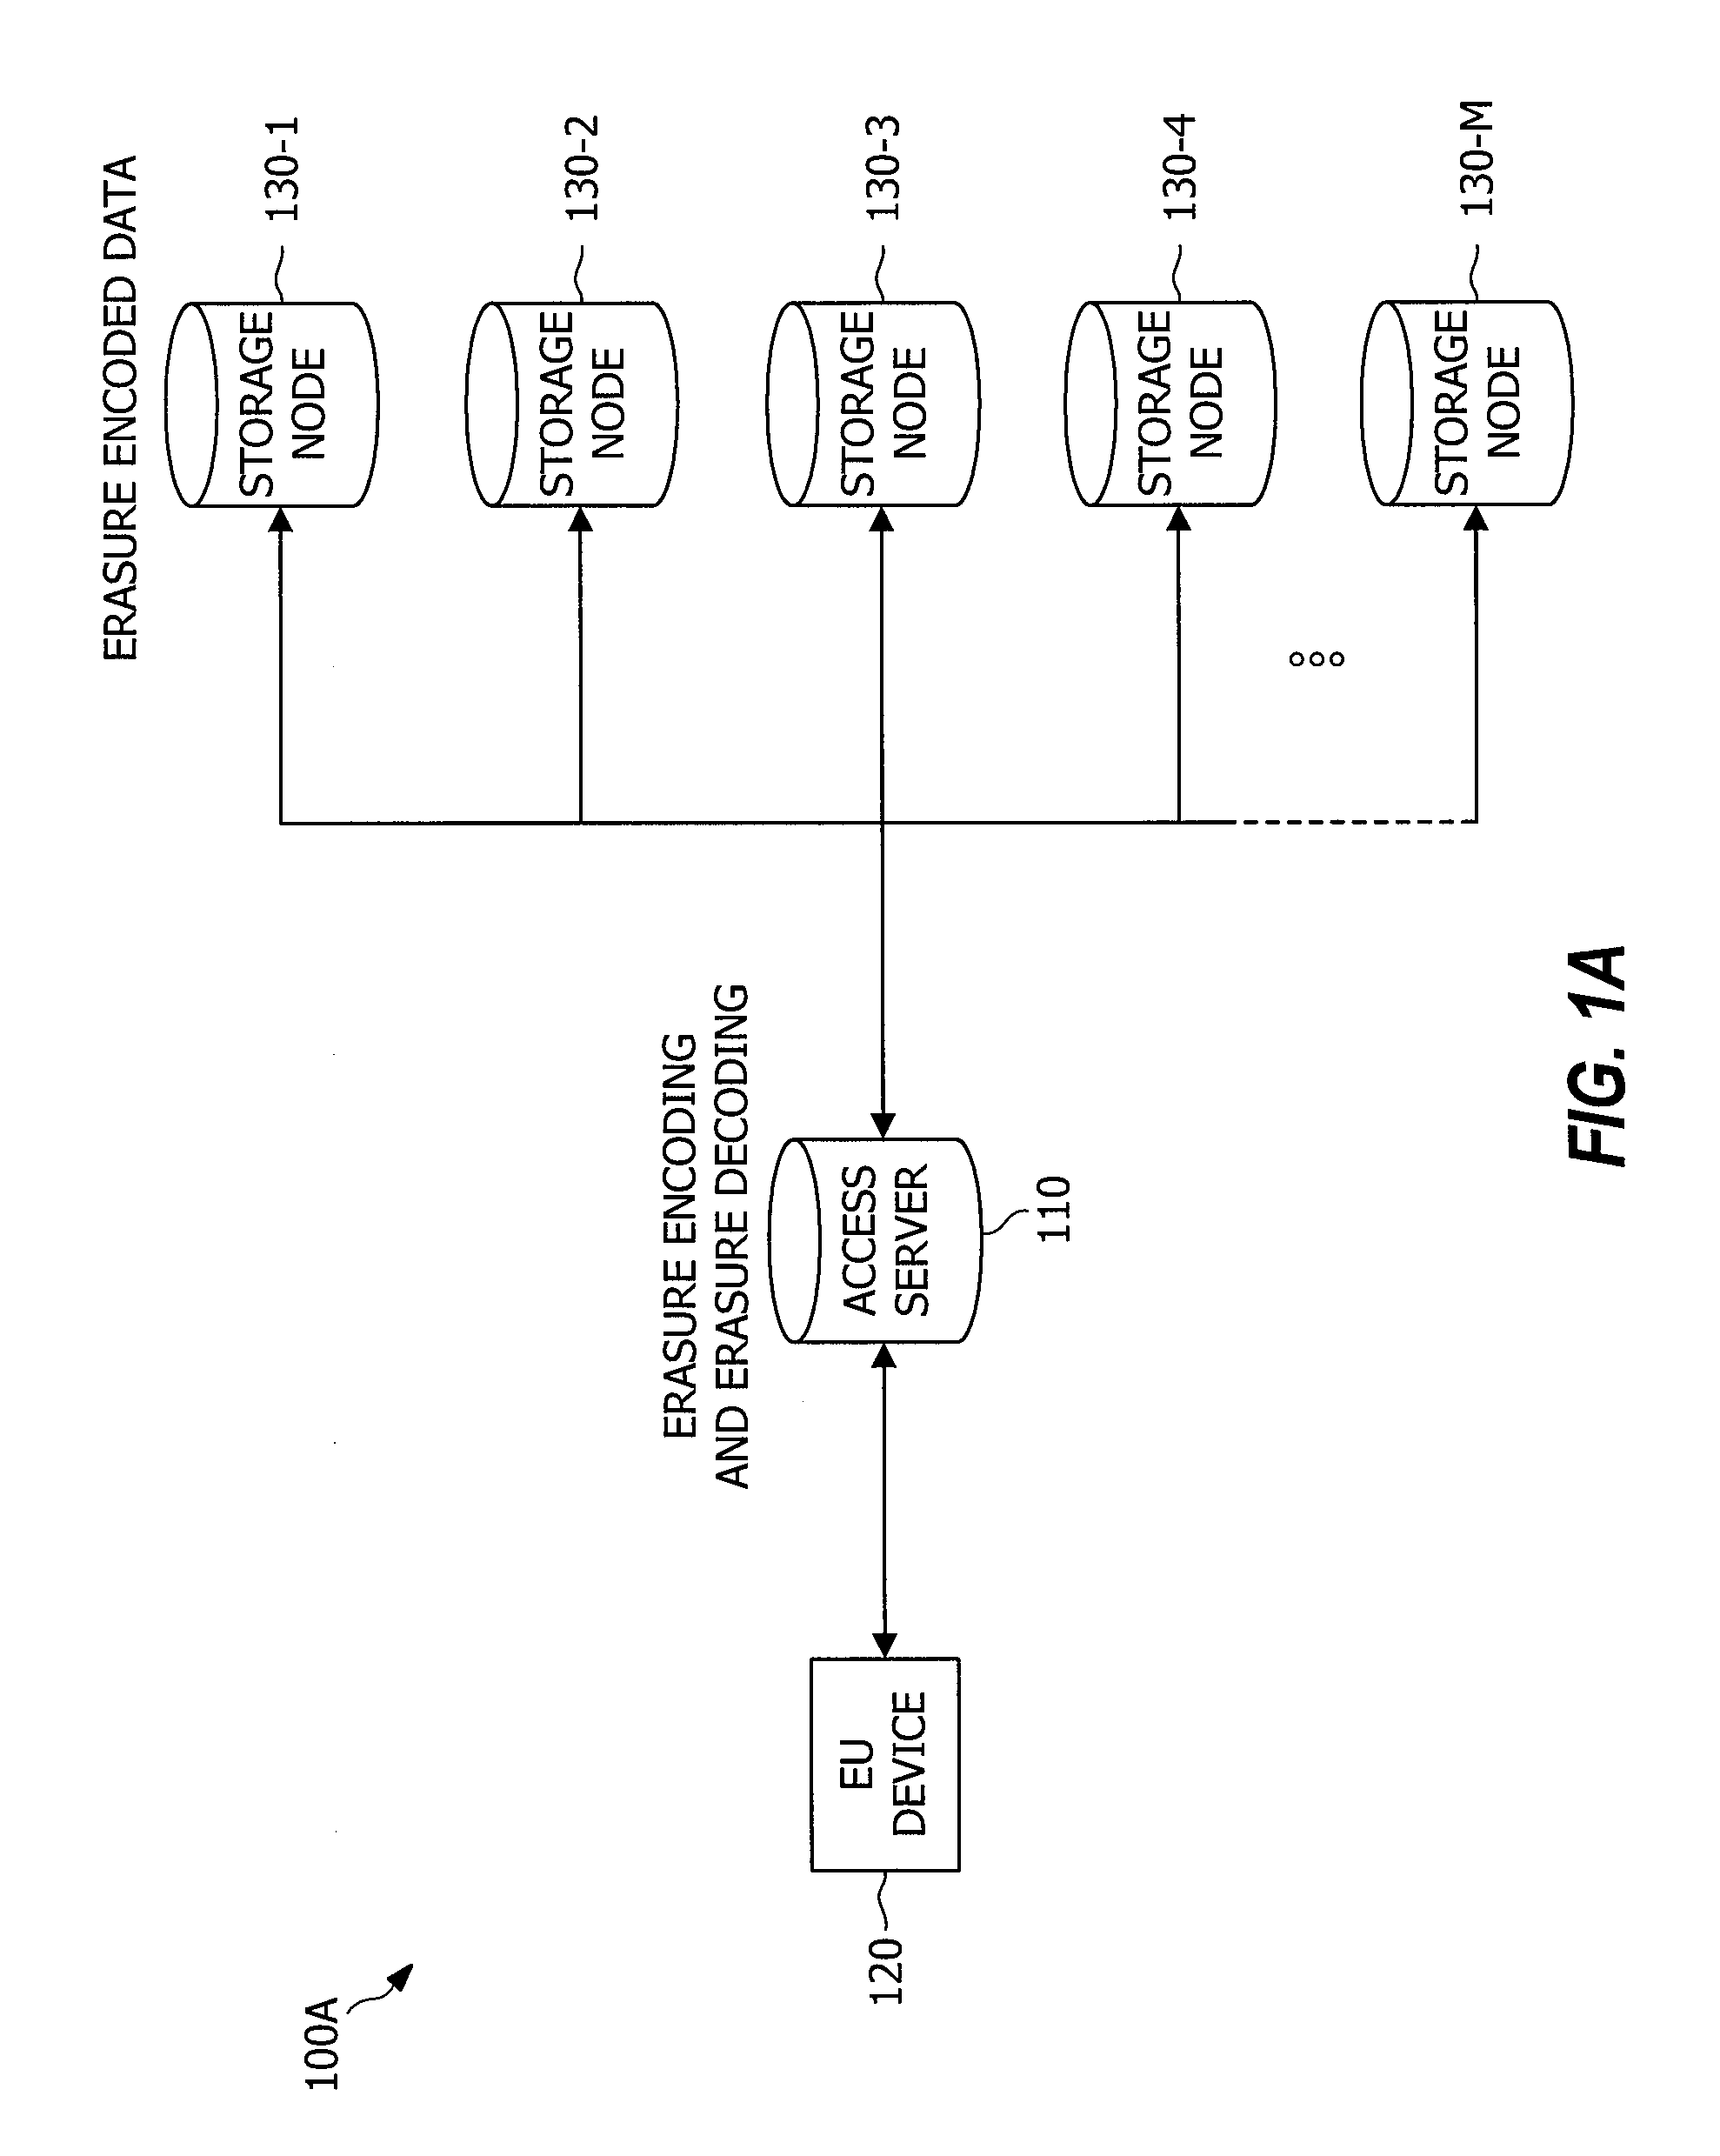 Systems and methods for repair redundancy control for large erasure coded data storage